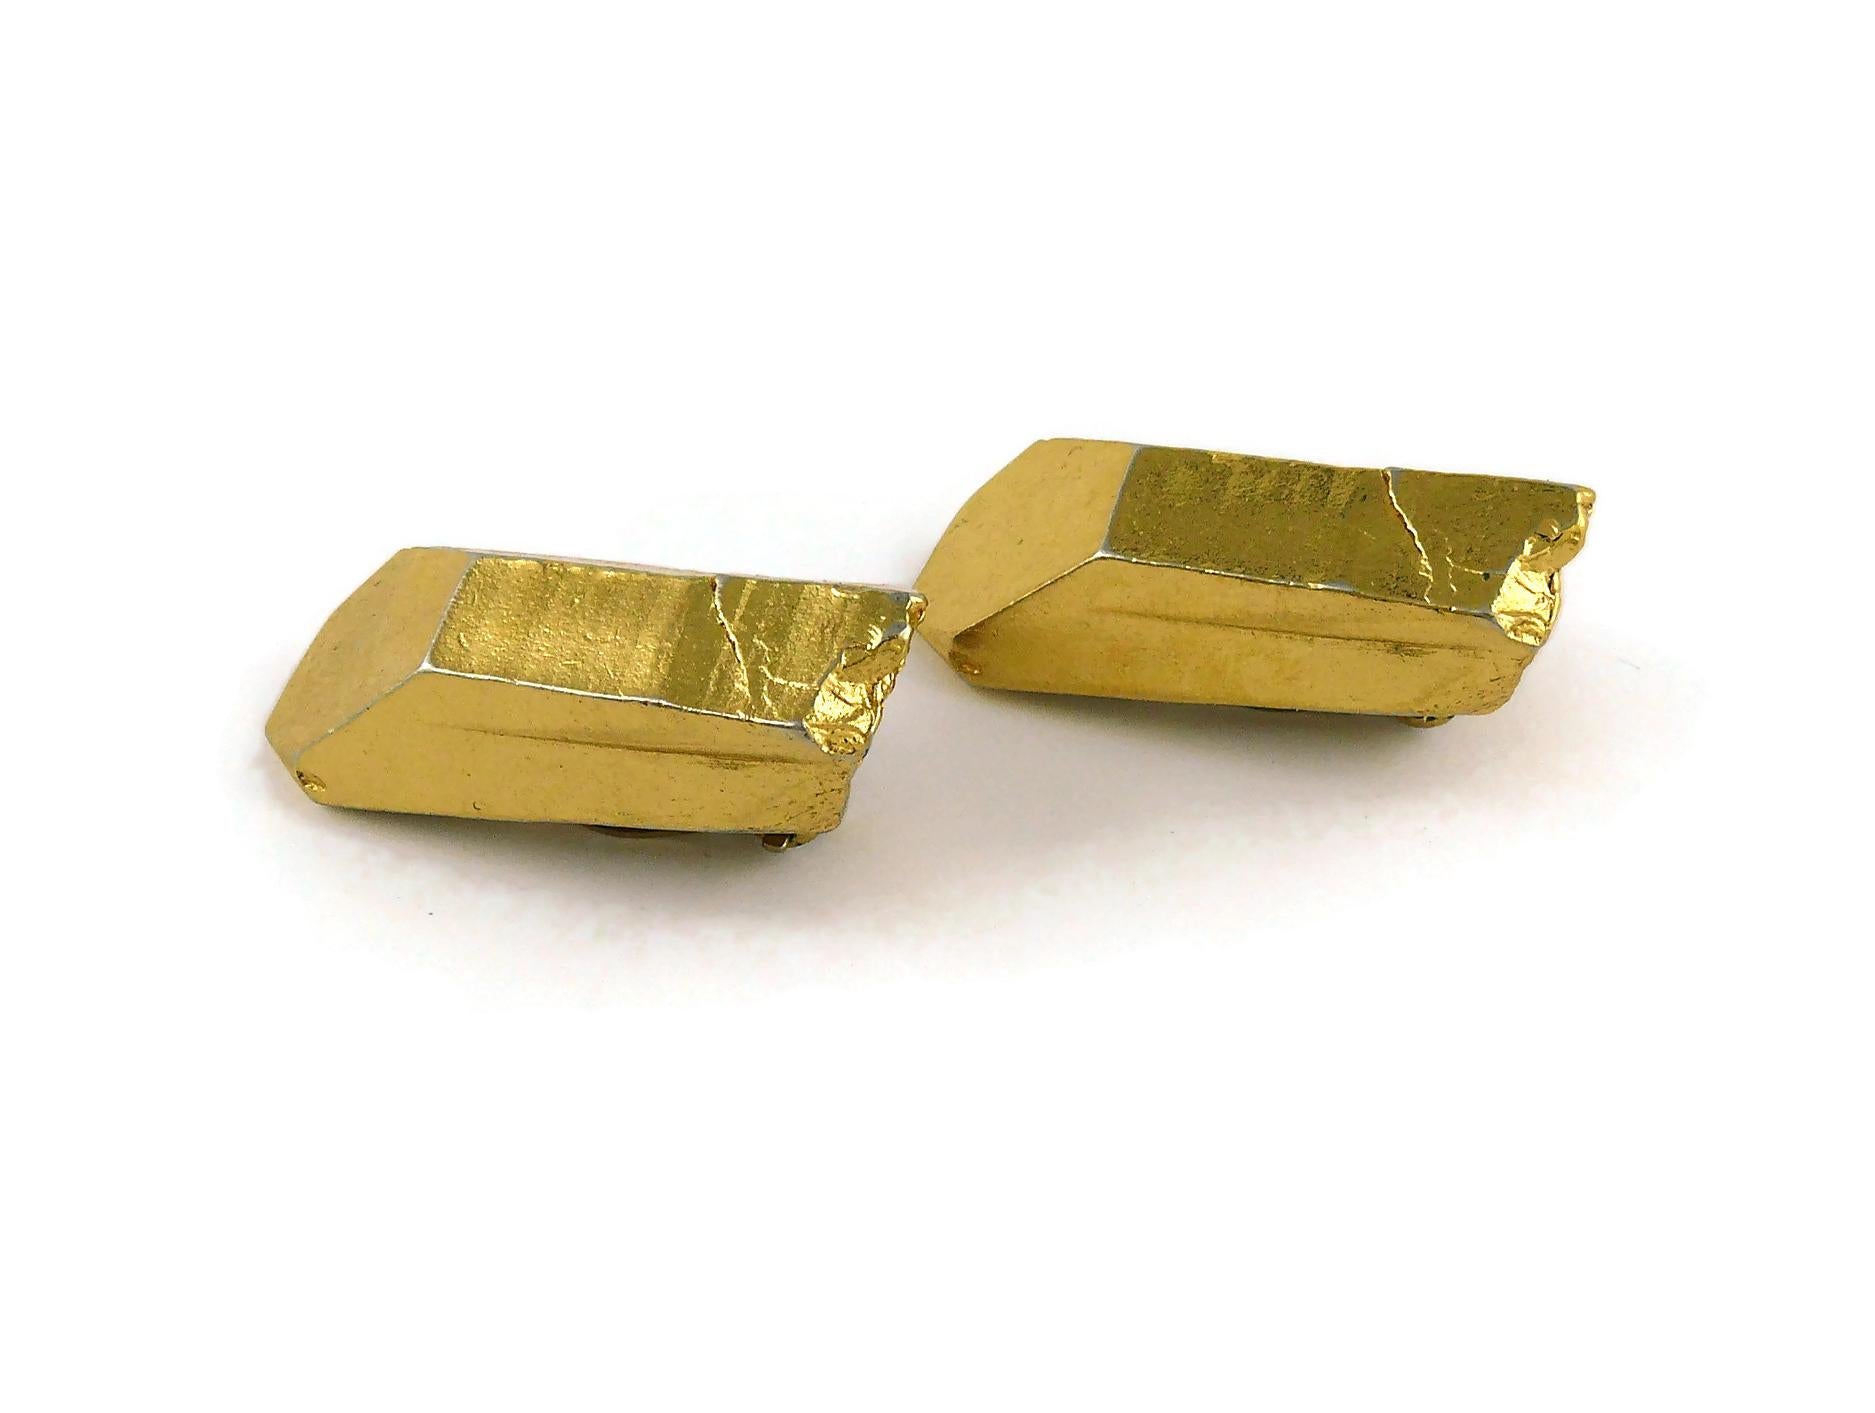 Yves Saint Laurent YSL Vintage Gold Toned Rock Crystal Shaped Clip On Earrings 2